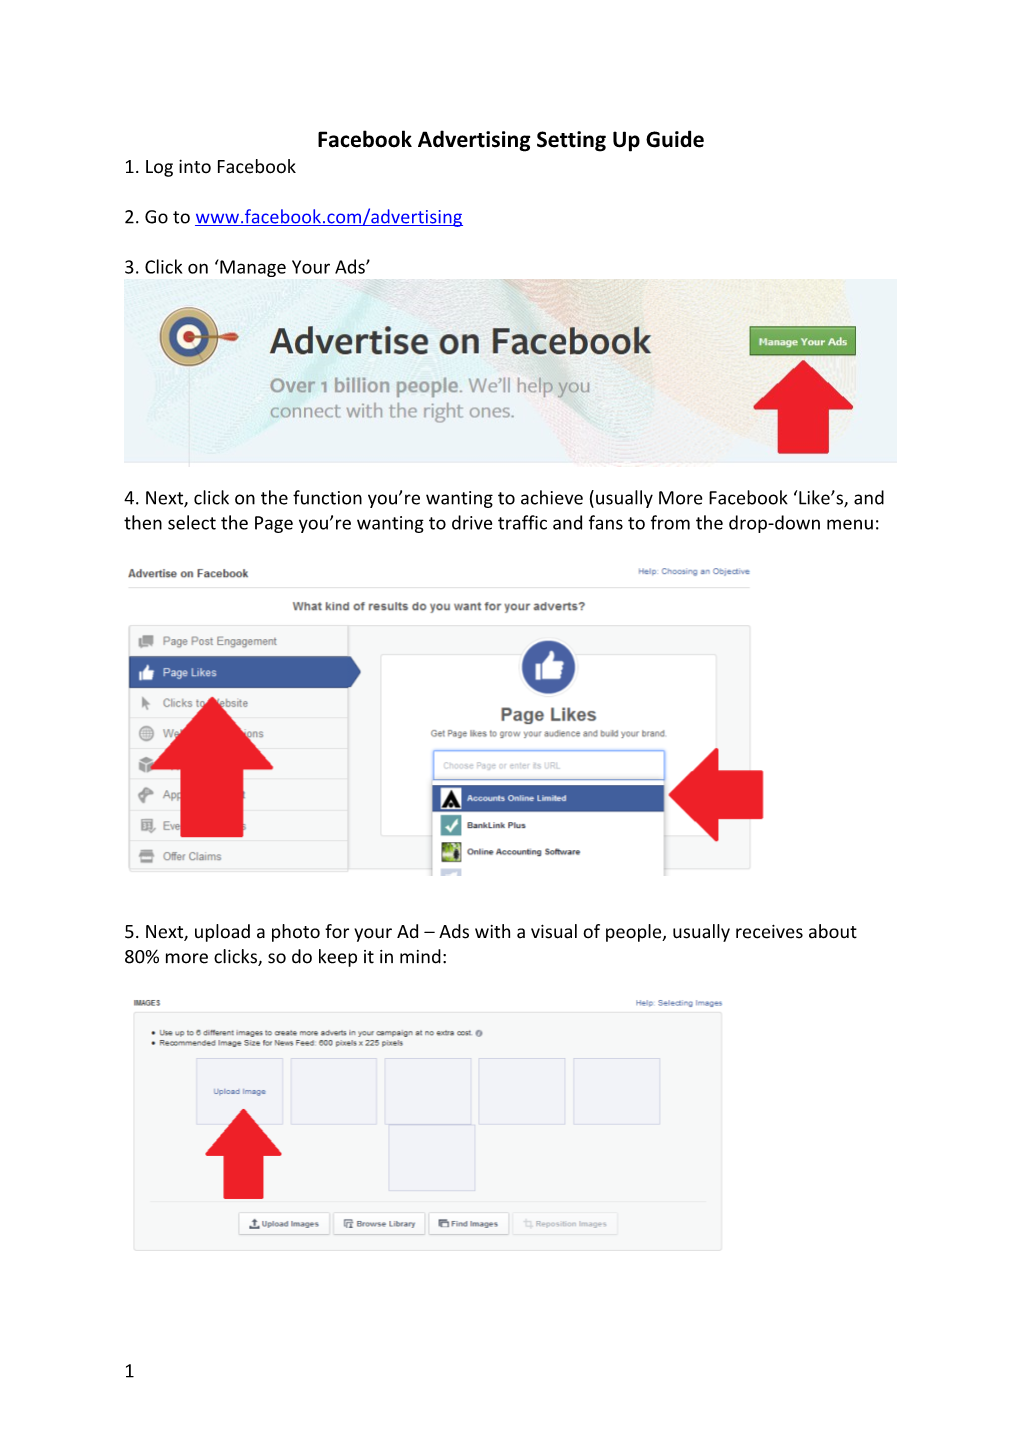 Facebook Advertising Setting up Guide